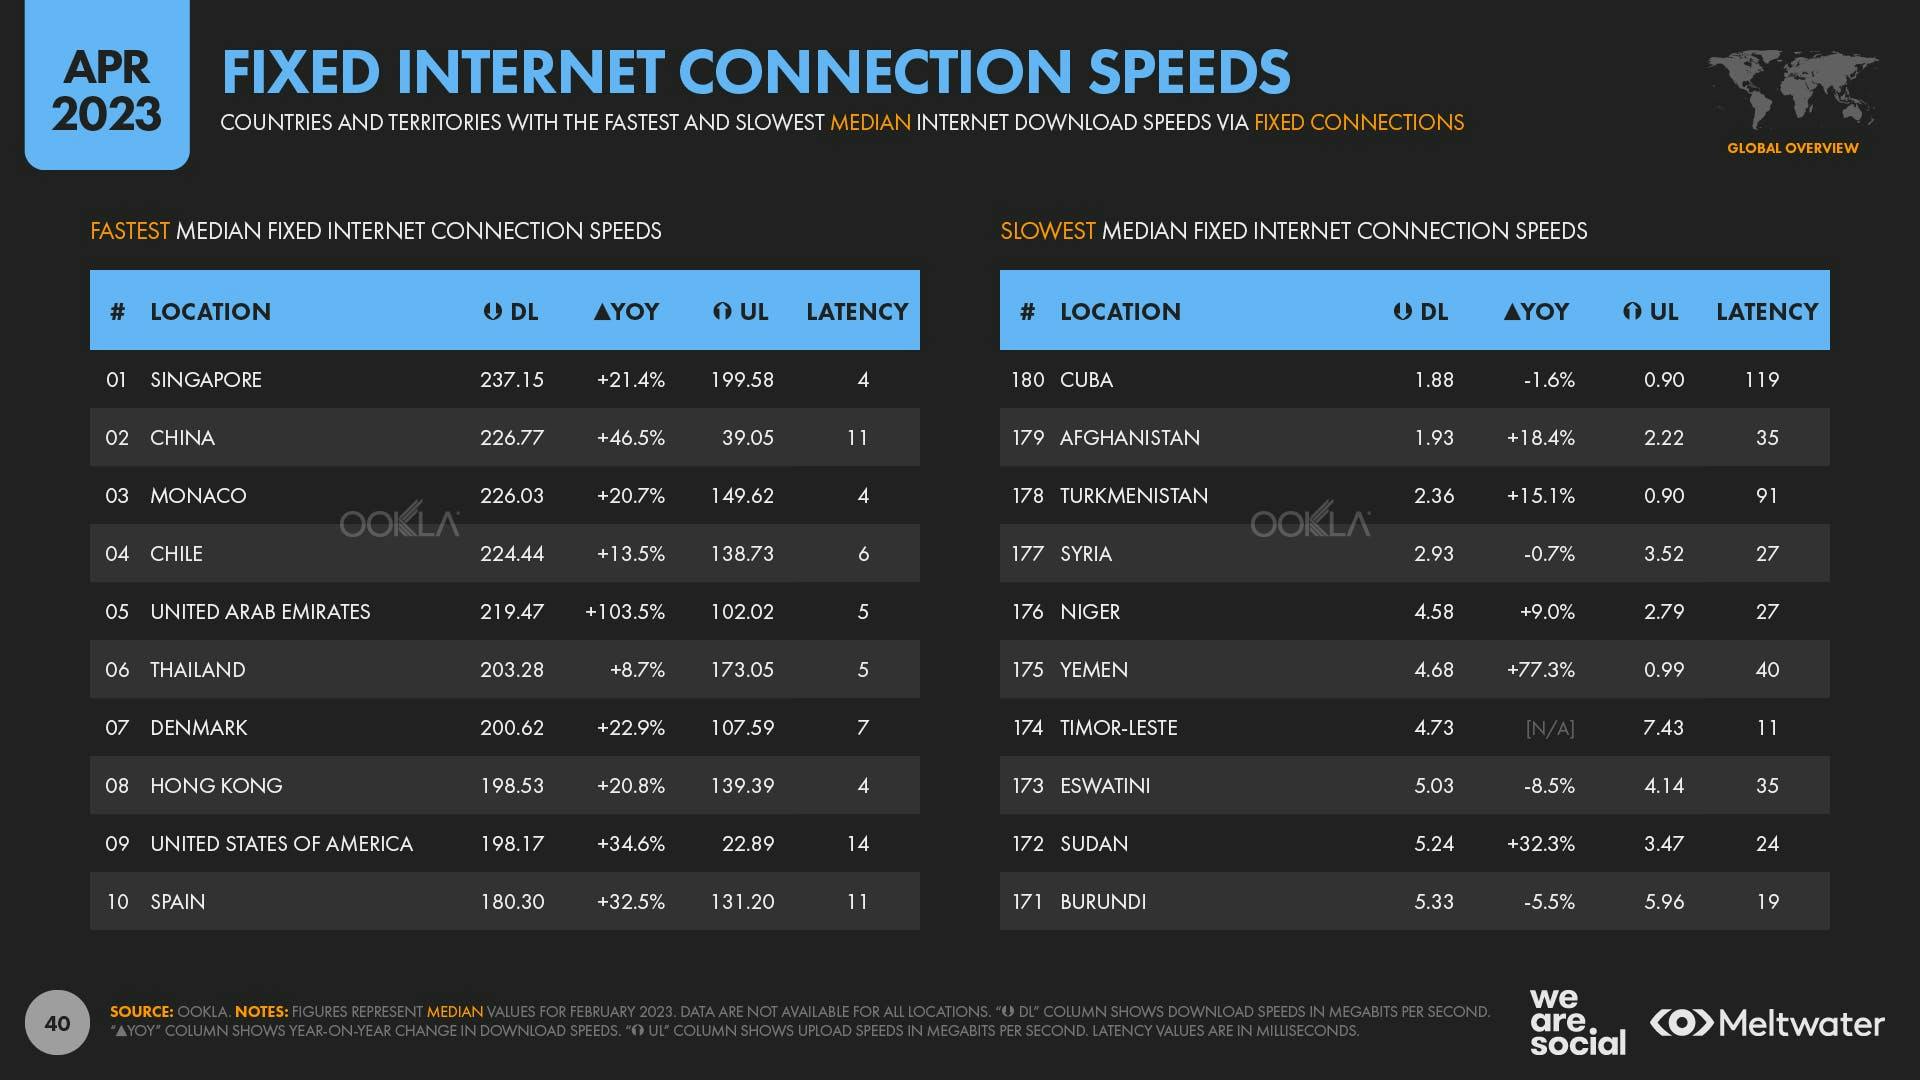 April 2023 Global State of Digital Report: Fixed Internet Connection Speeds